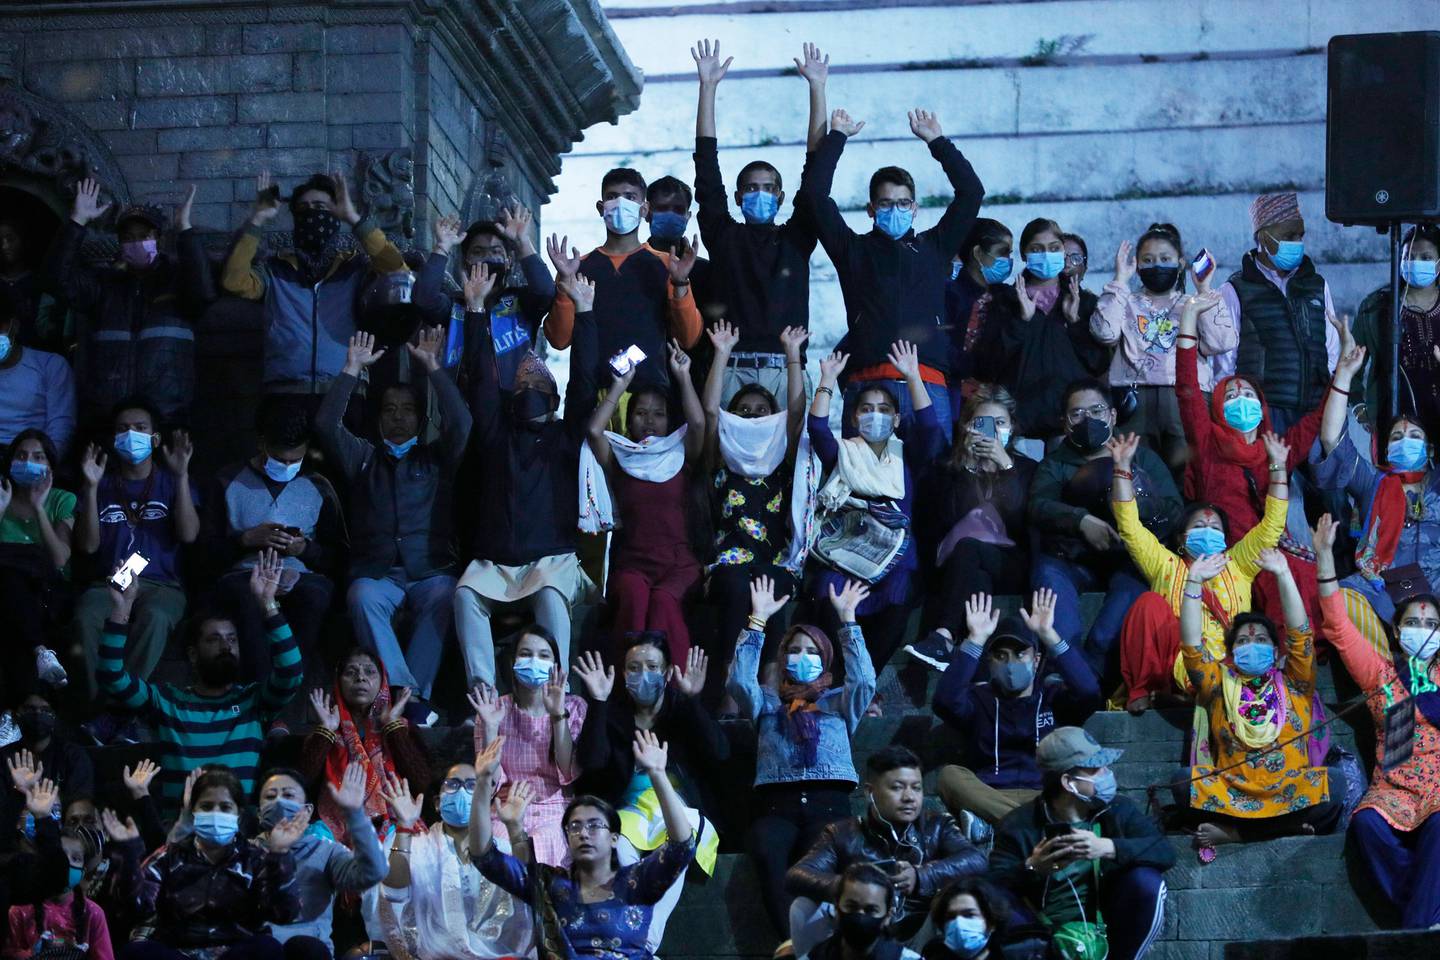 Nepalese people wearing face masks as a precaution against the coronavirus chant hymns as they gather for evening rituals at Pashupatinath Hindu temple in Kathmandu, Nepal. Photo / AP